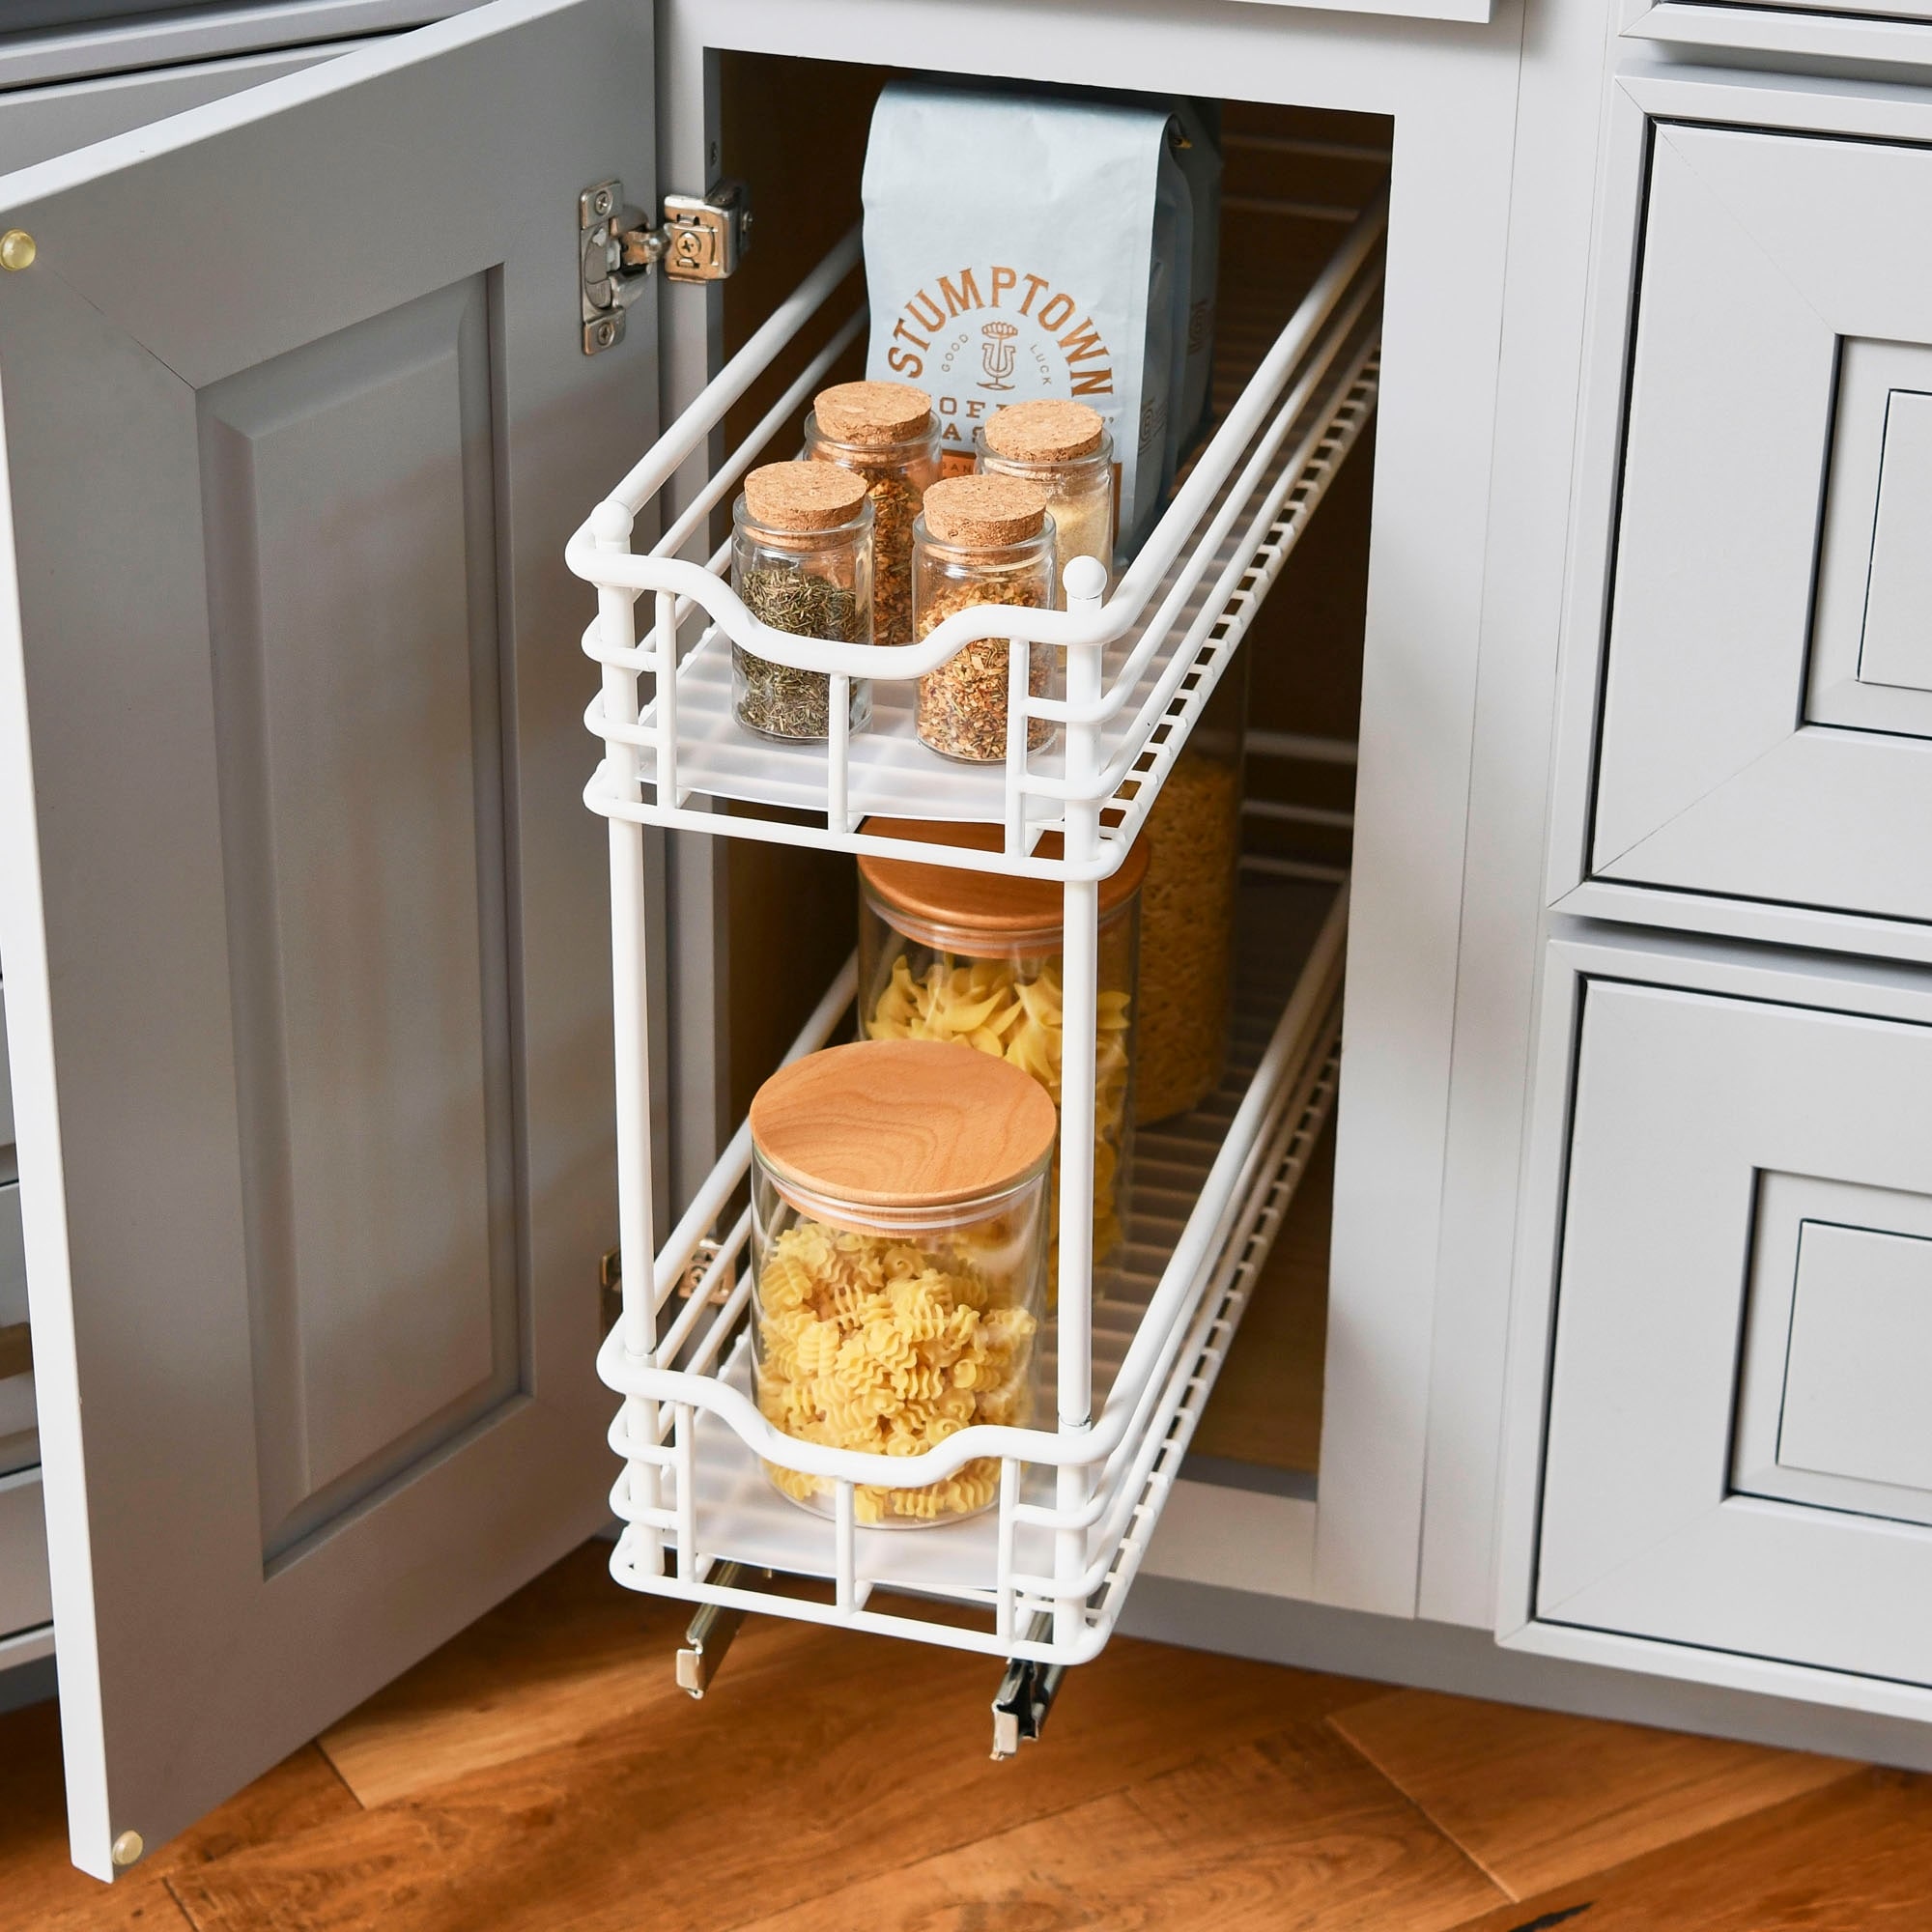 Narrow Two Sliding Cabinet Organizer, Great for Slim Cabinets in Kitchen -  Bed Bath & Beyond - 35517359